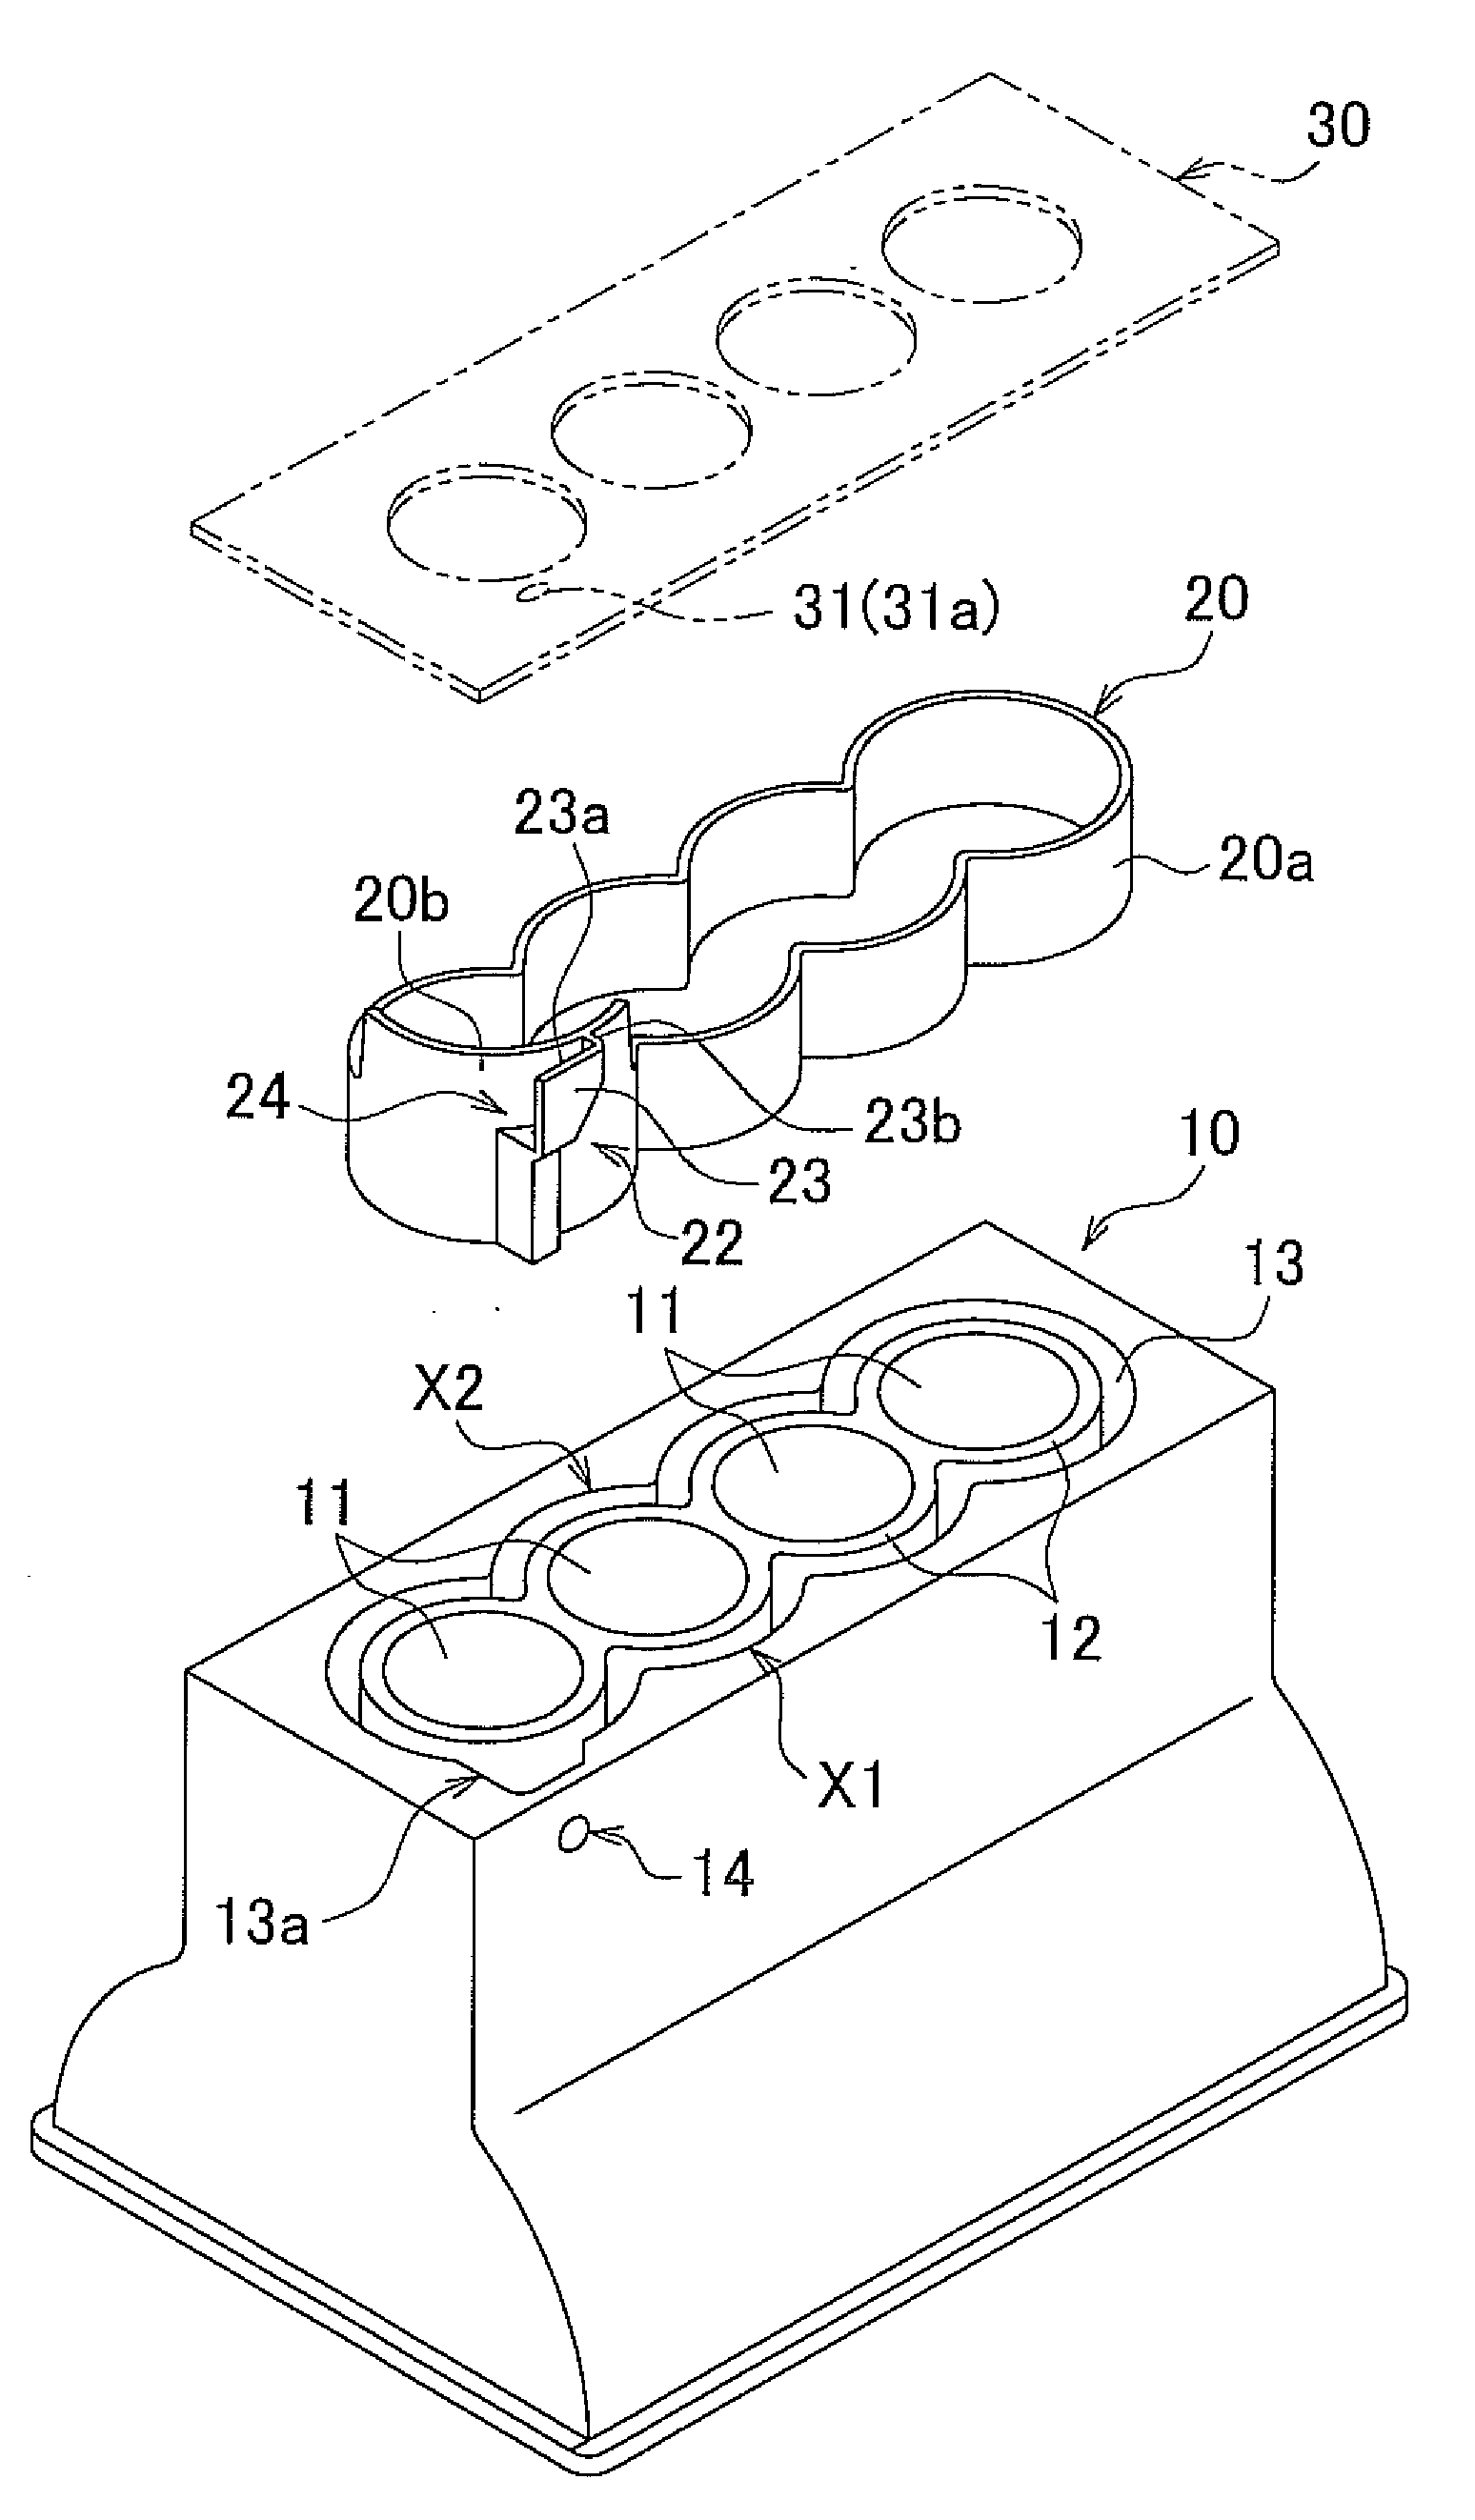 Cooling structure of internal combustion engine